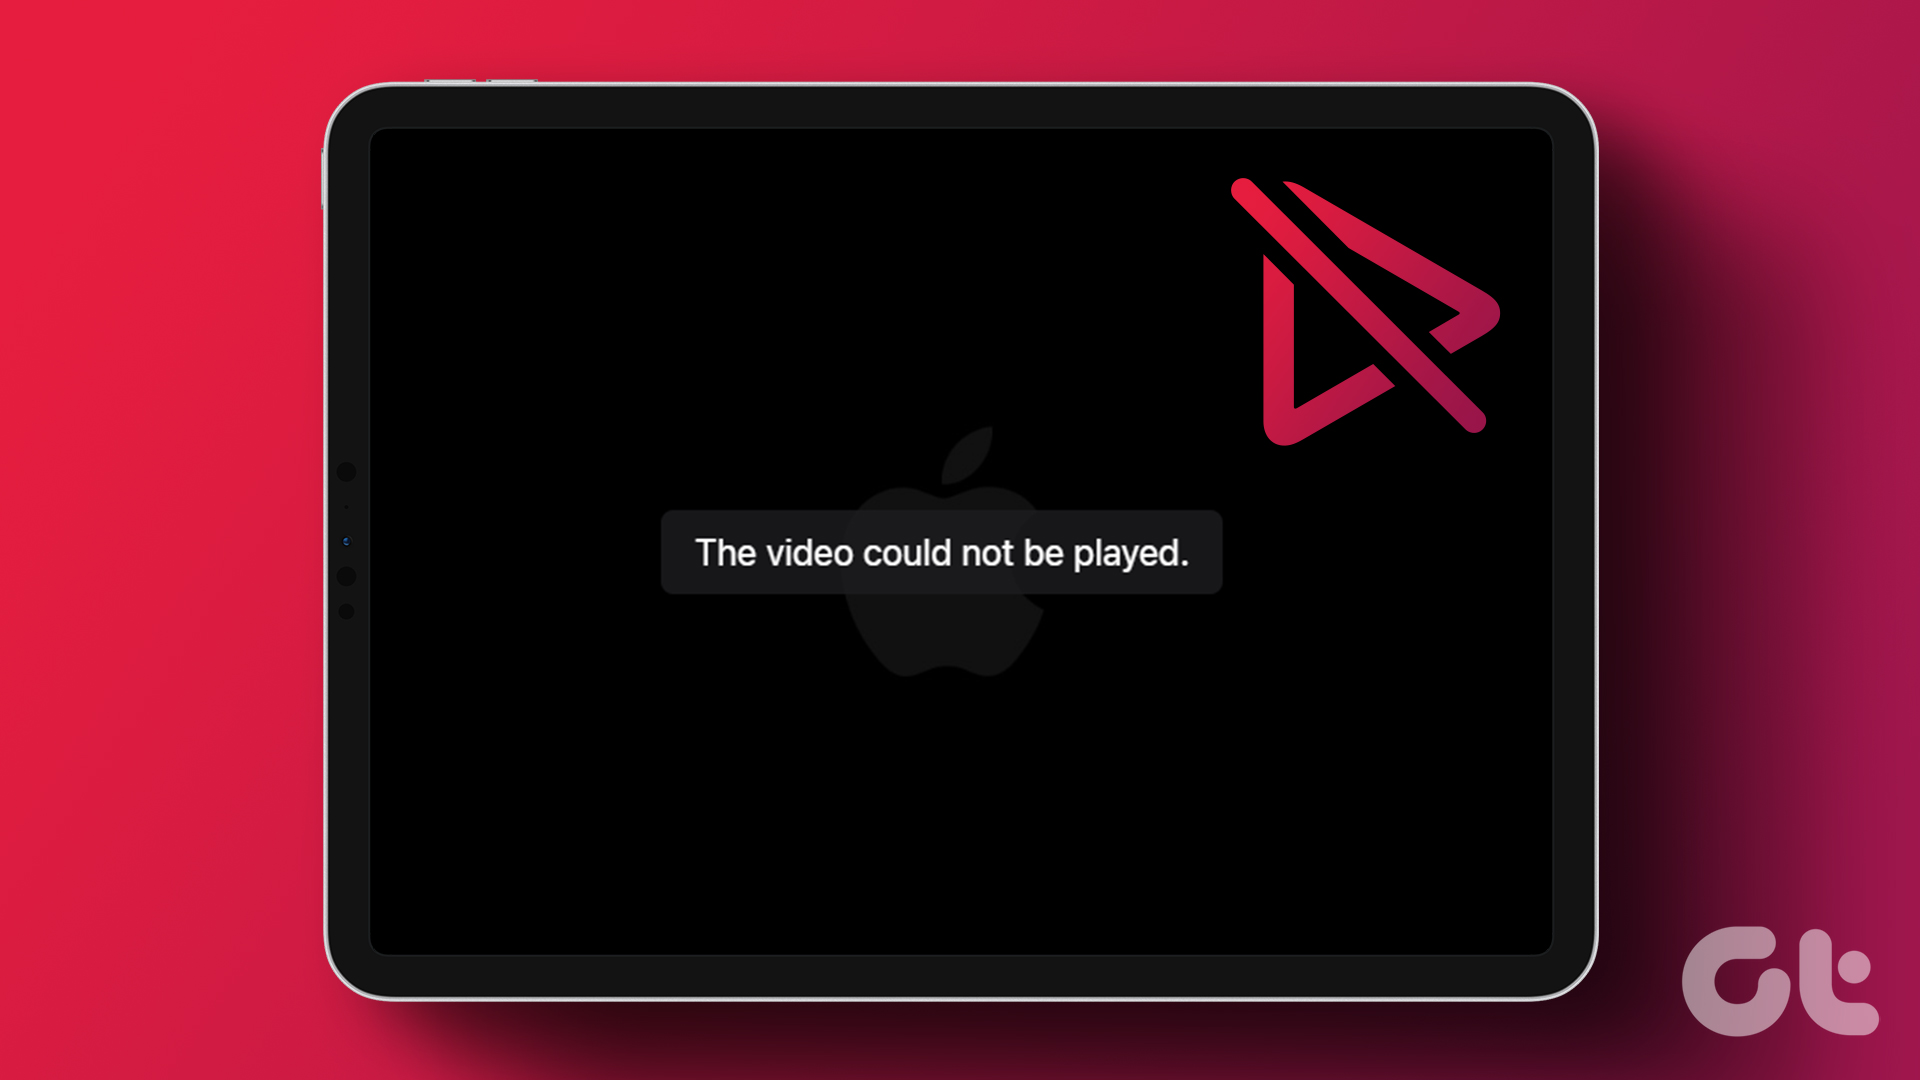 11 Best Ways to Fix Videos Not Streaming on Apple iPad